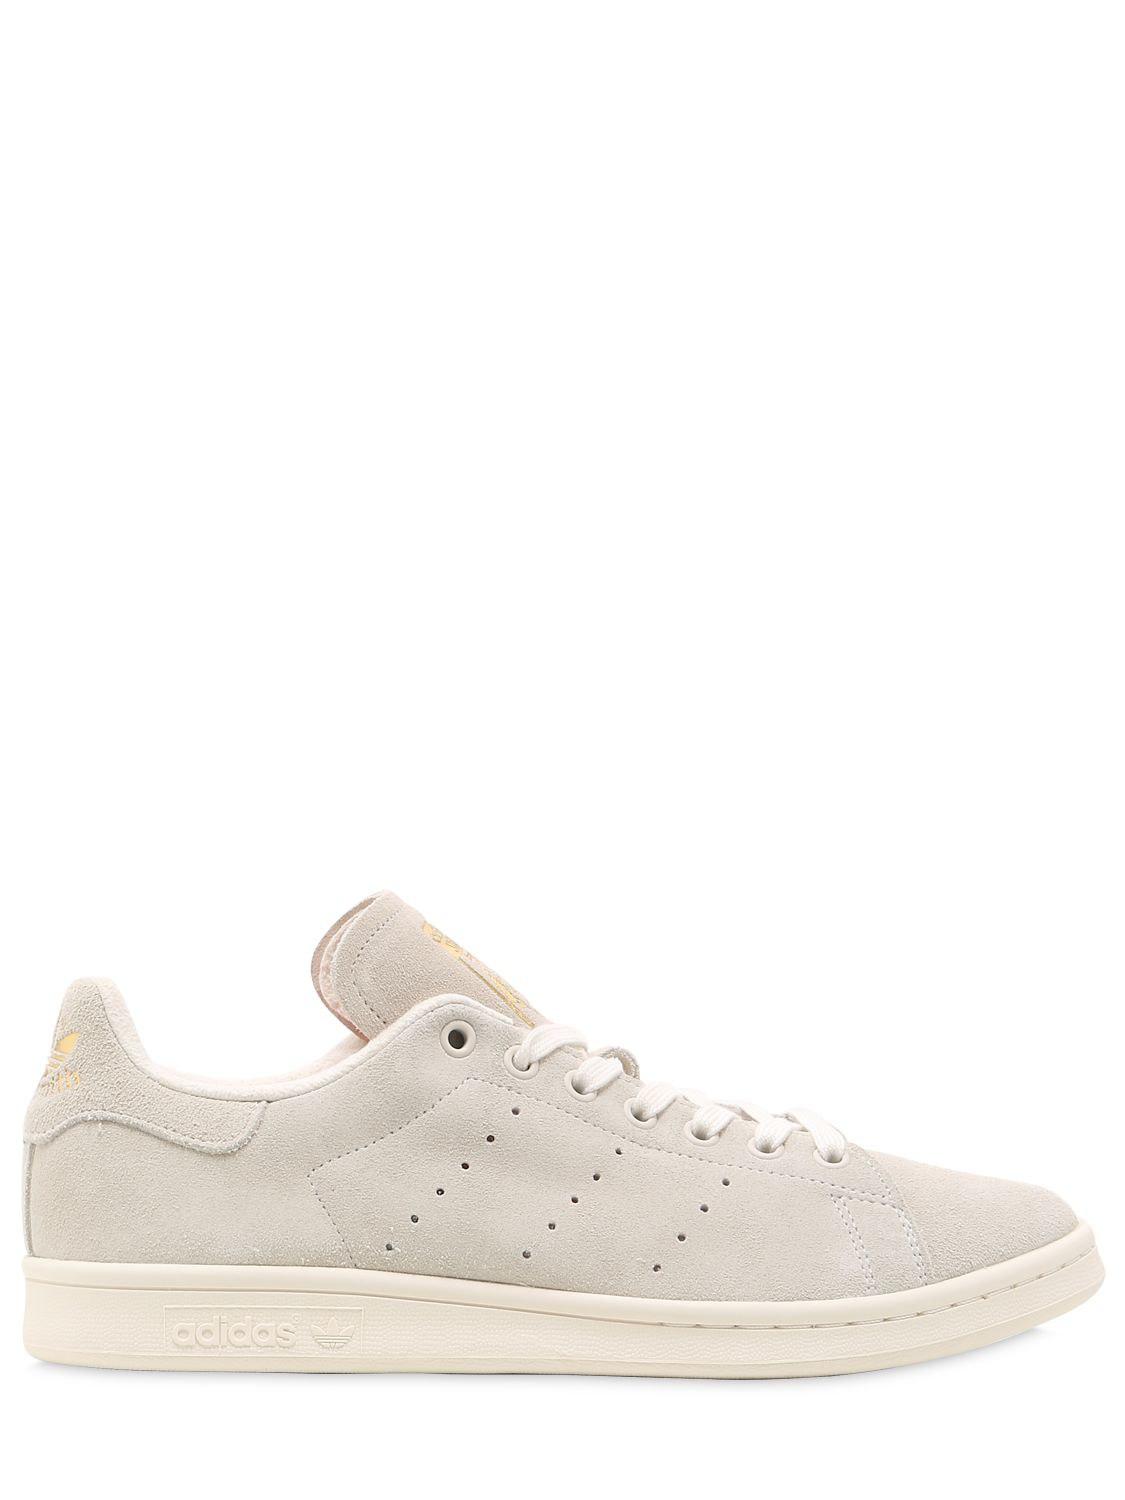 adidas Originals Stan Smith Suede Sneakers in Natural for Men | Lyst